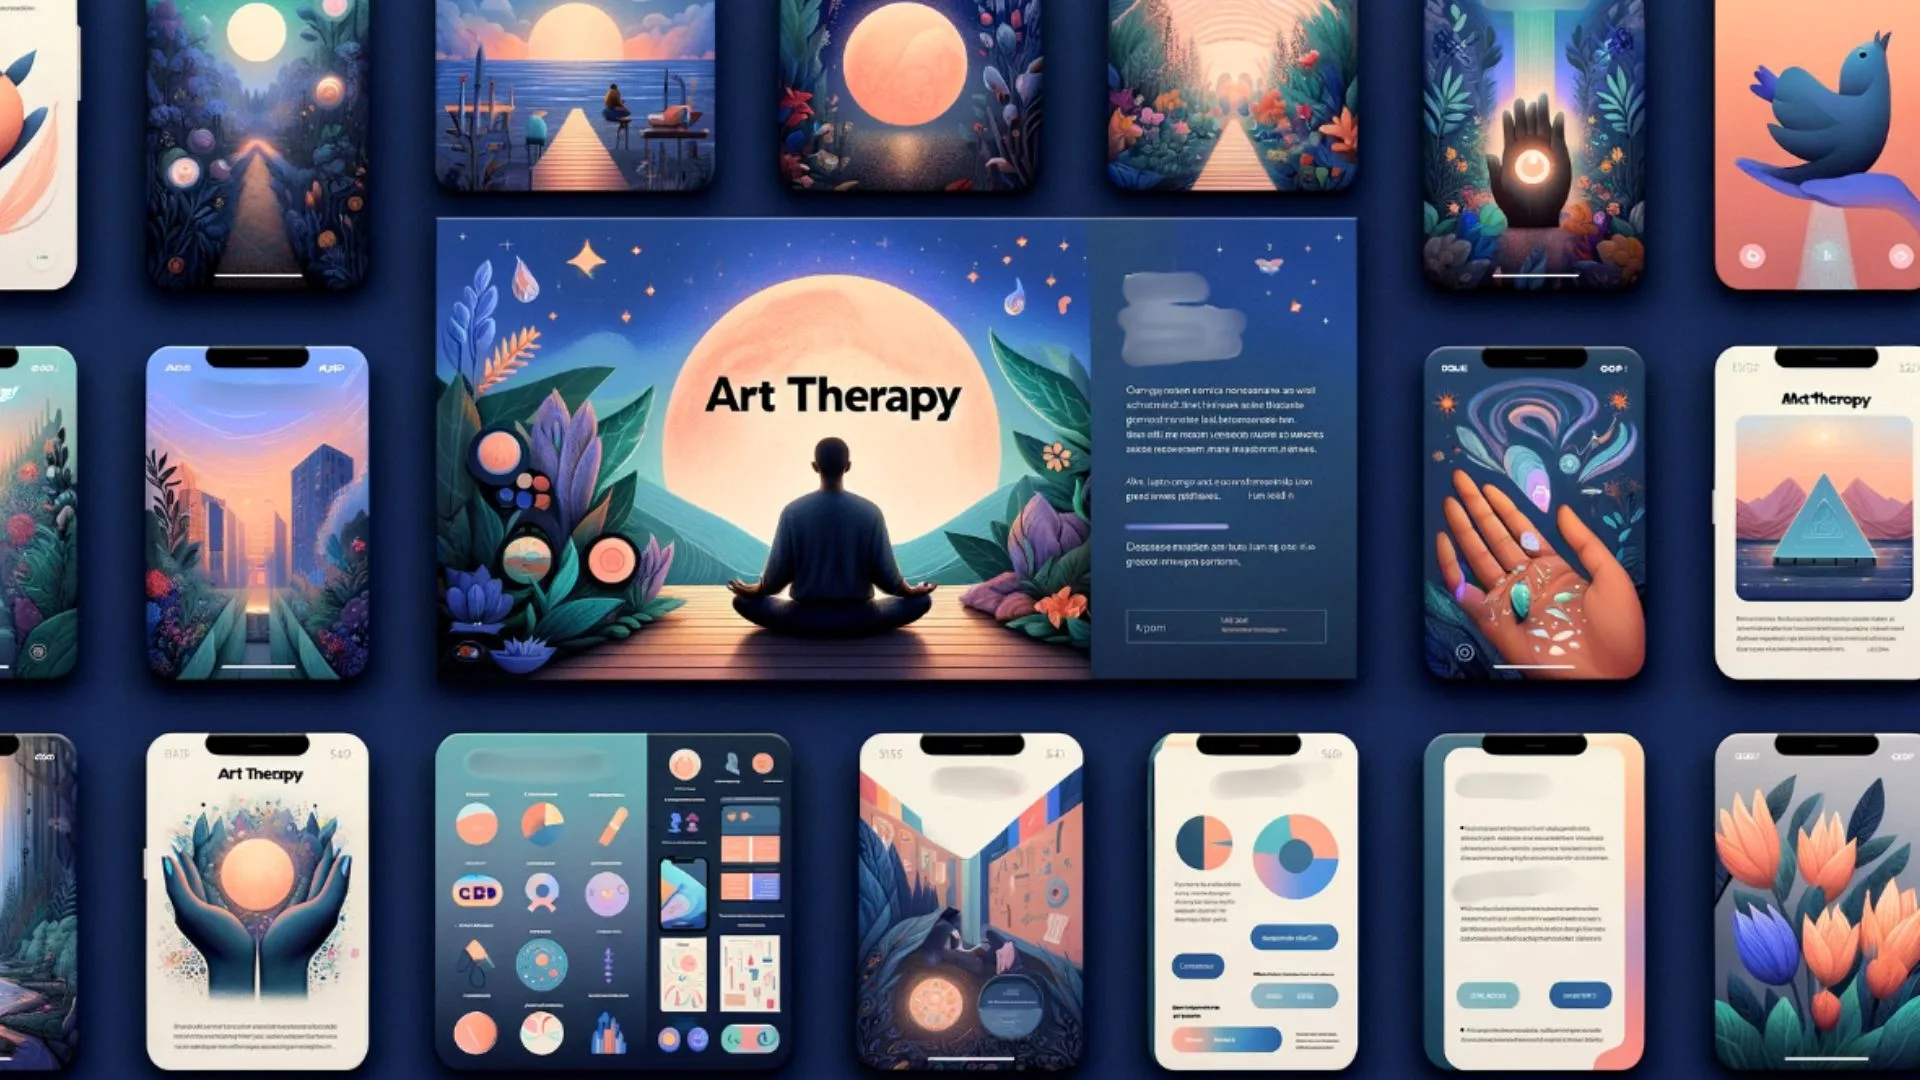 Mobile Art Therapy App Pitch Deck Mockup